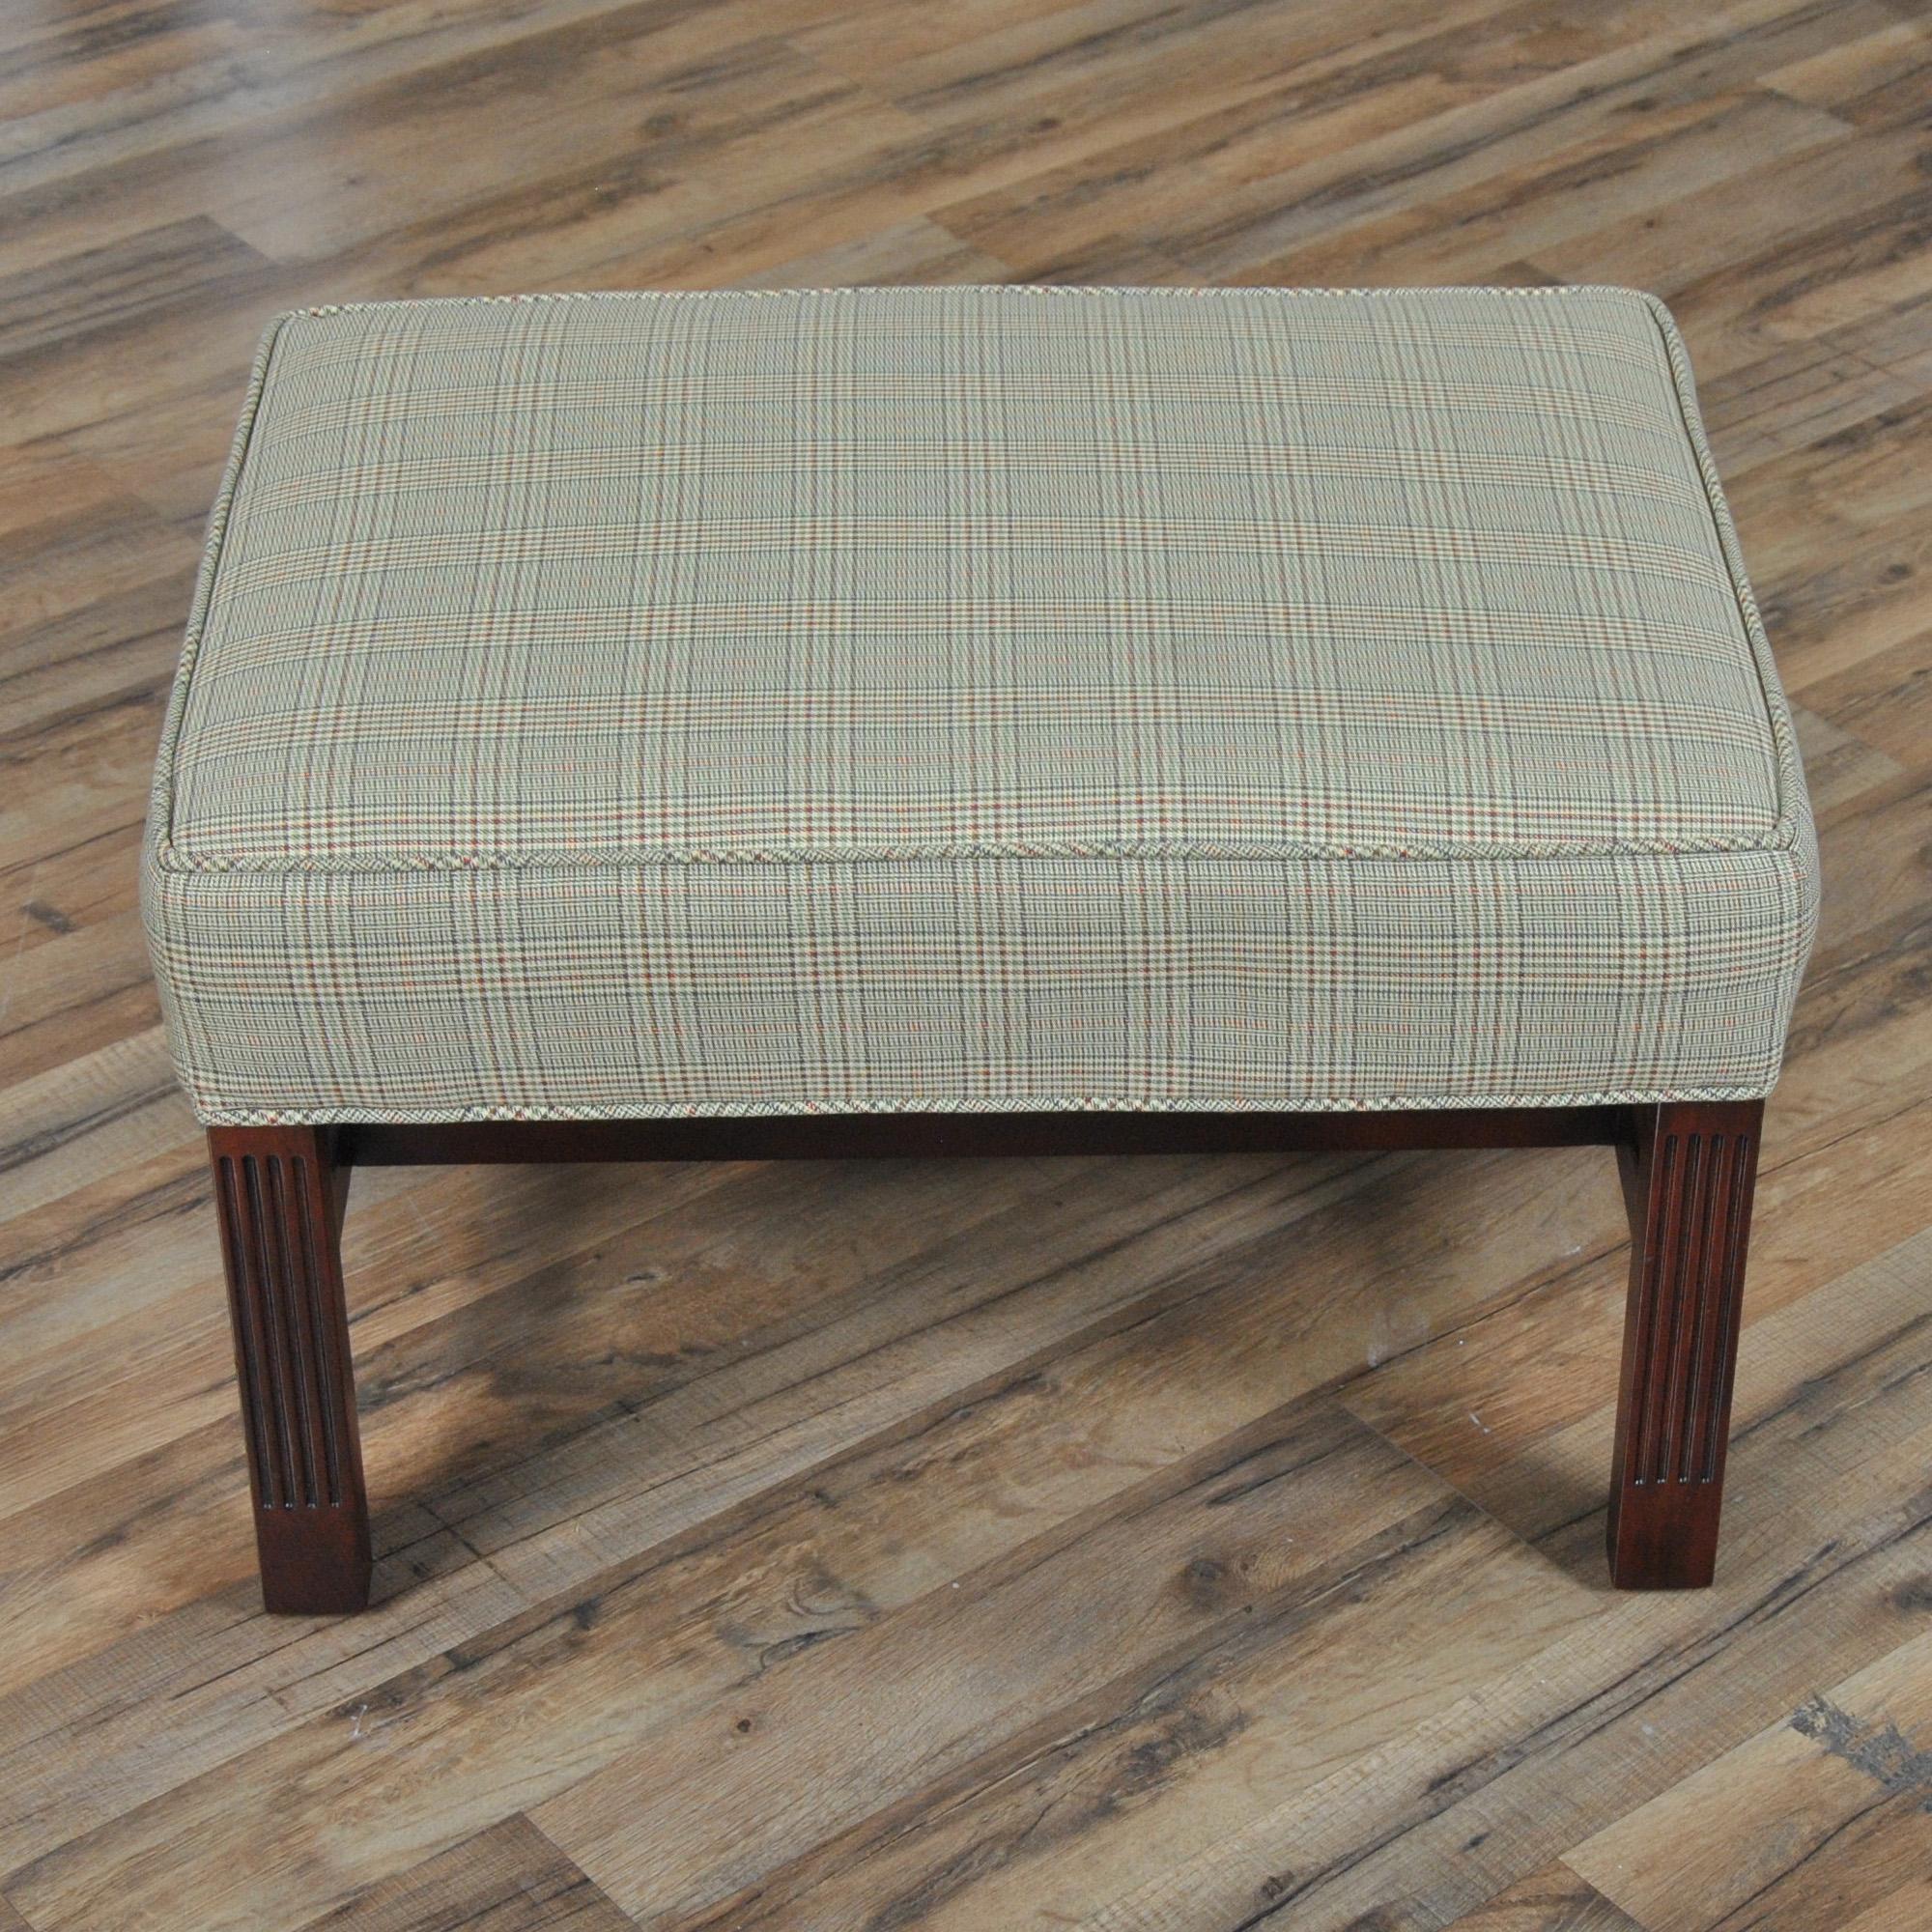 This Vintage Southwood Ottoman being offered from Niagara Furniture is impressive with it’s boldly colored fabric. Superbly crafted in the USA this Ottoman has a great designer look with a solid and comfortable frame. Inspired by decades of design